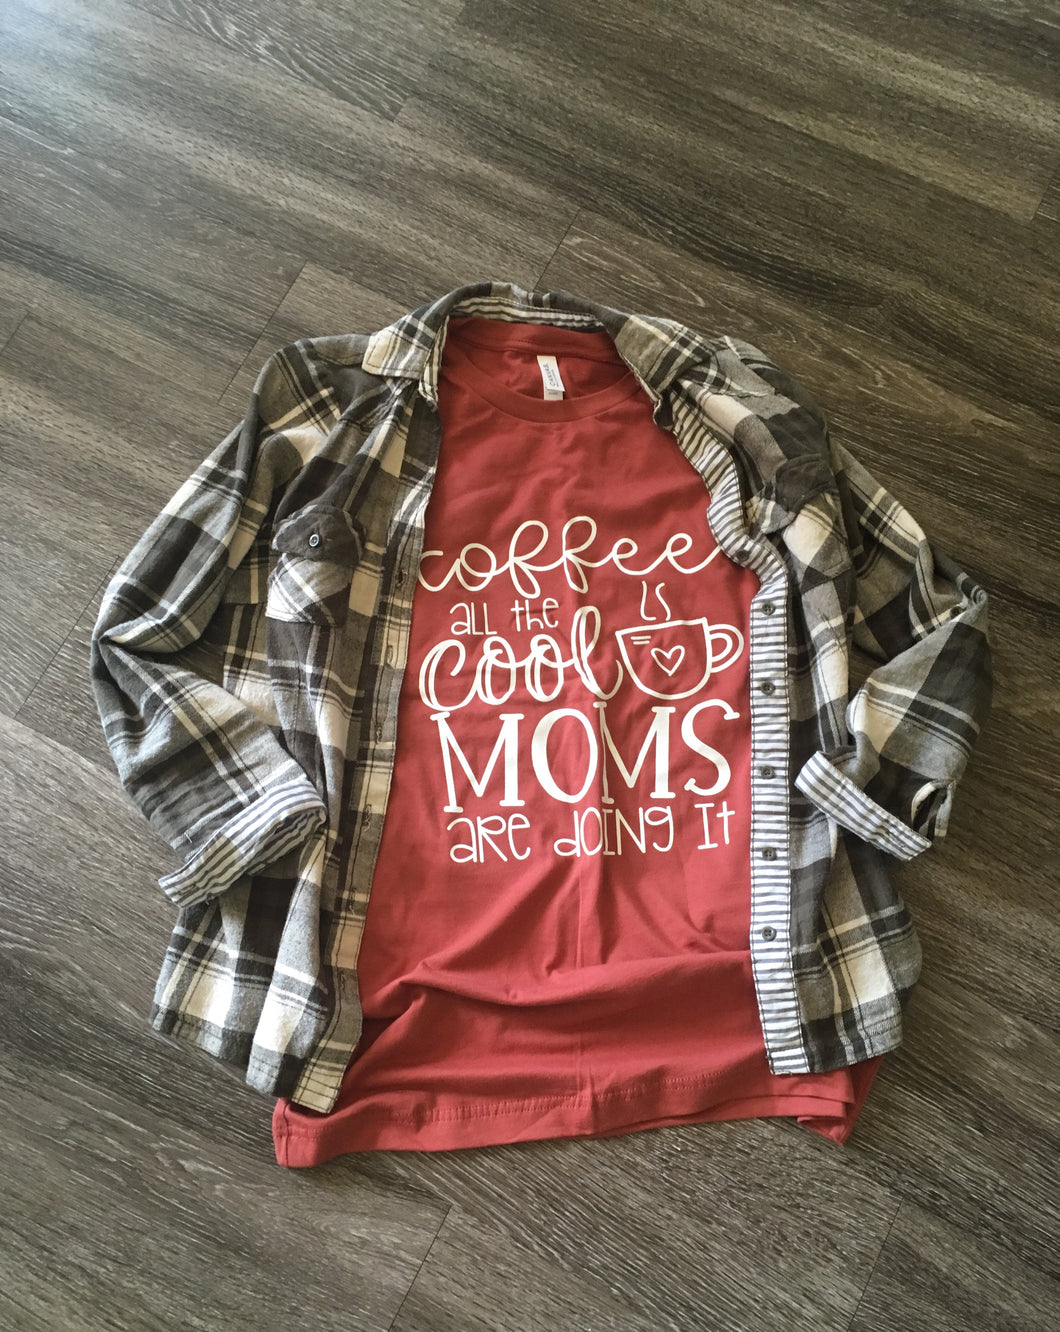 Coffee Mom T-Shirts Tee Shirts Bella (Two color choices) Coffee All The Cool Moms are Doing IT